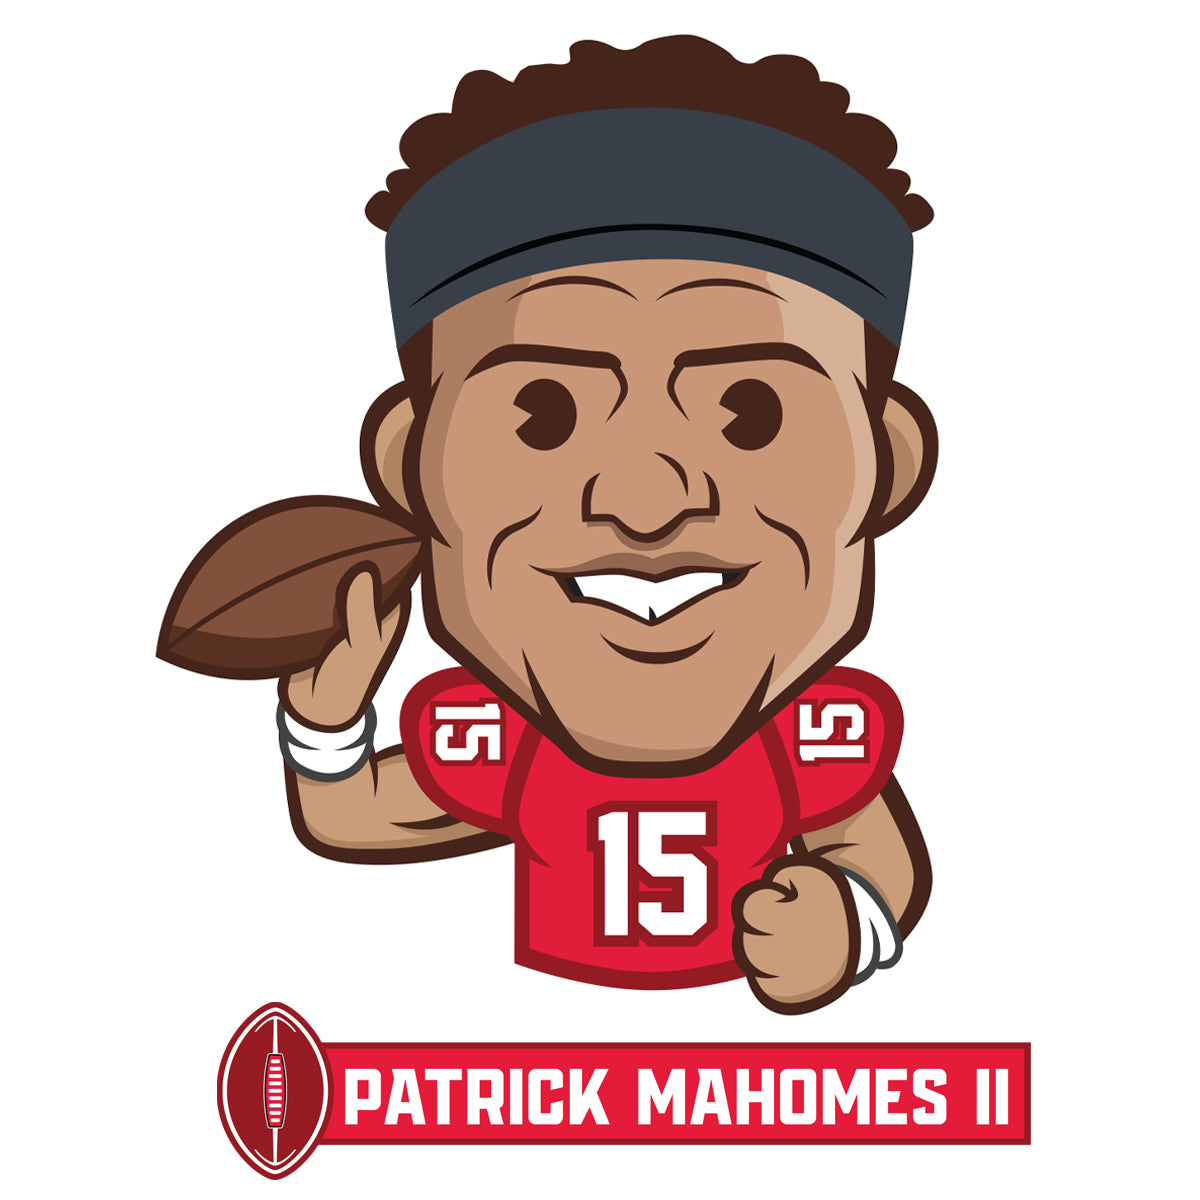 nfl #patrickmahomes #superbowl #sports #whathappened #fyp #foryou #ti... |  TikTok